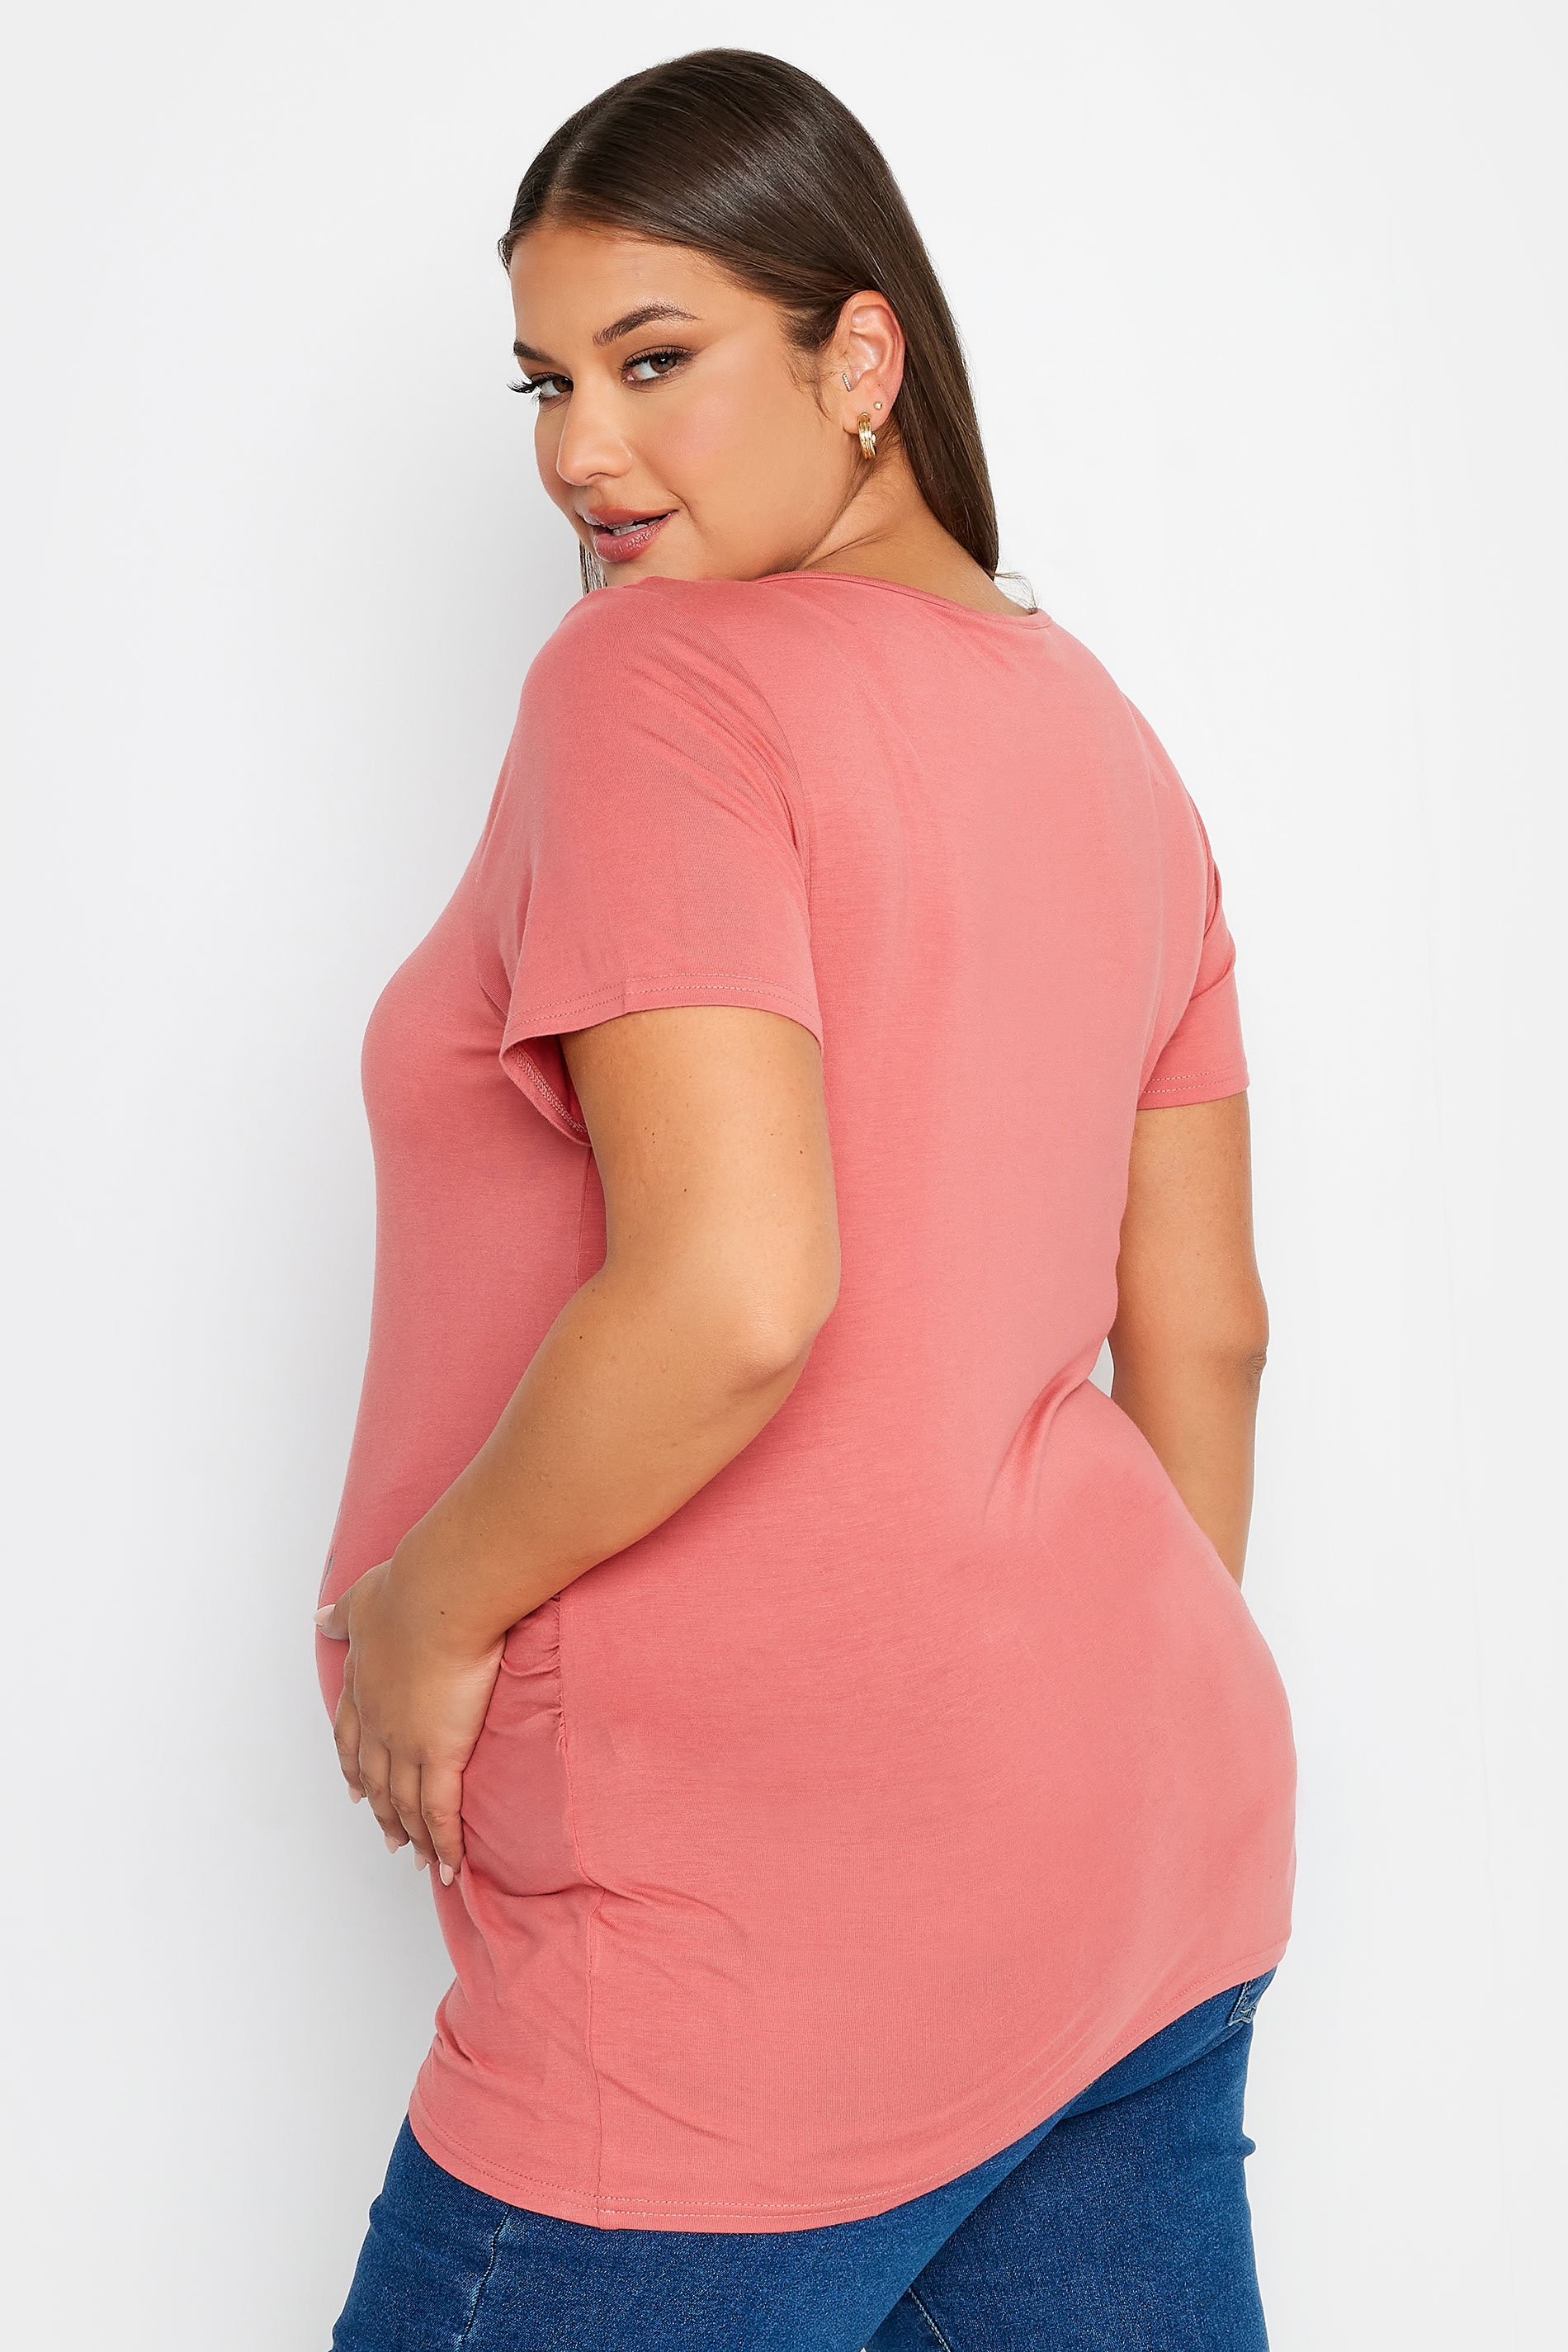 BUMP IT UP MATERNITY Plus Size Pink 'Hands Off The Bump' Slogan T-shirt | Yours Clothing 3